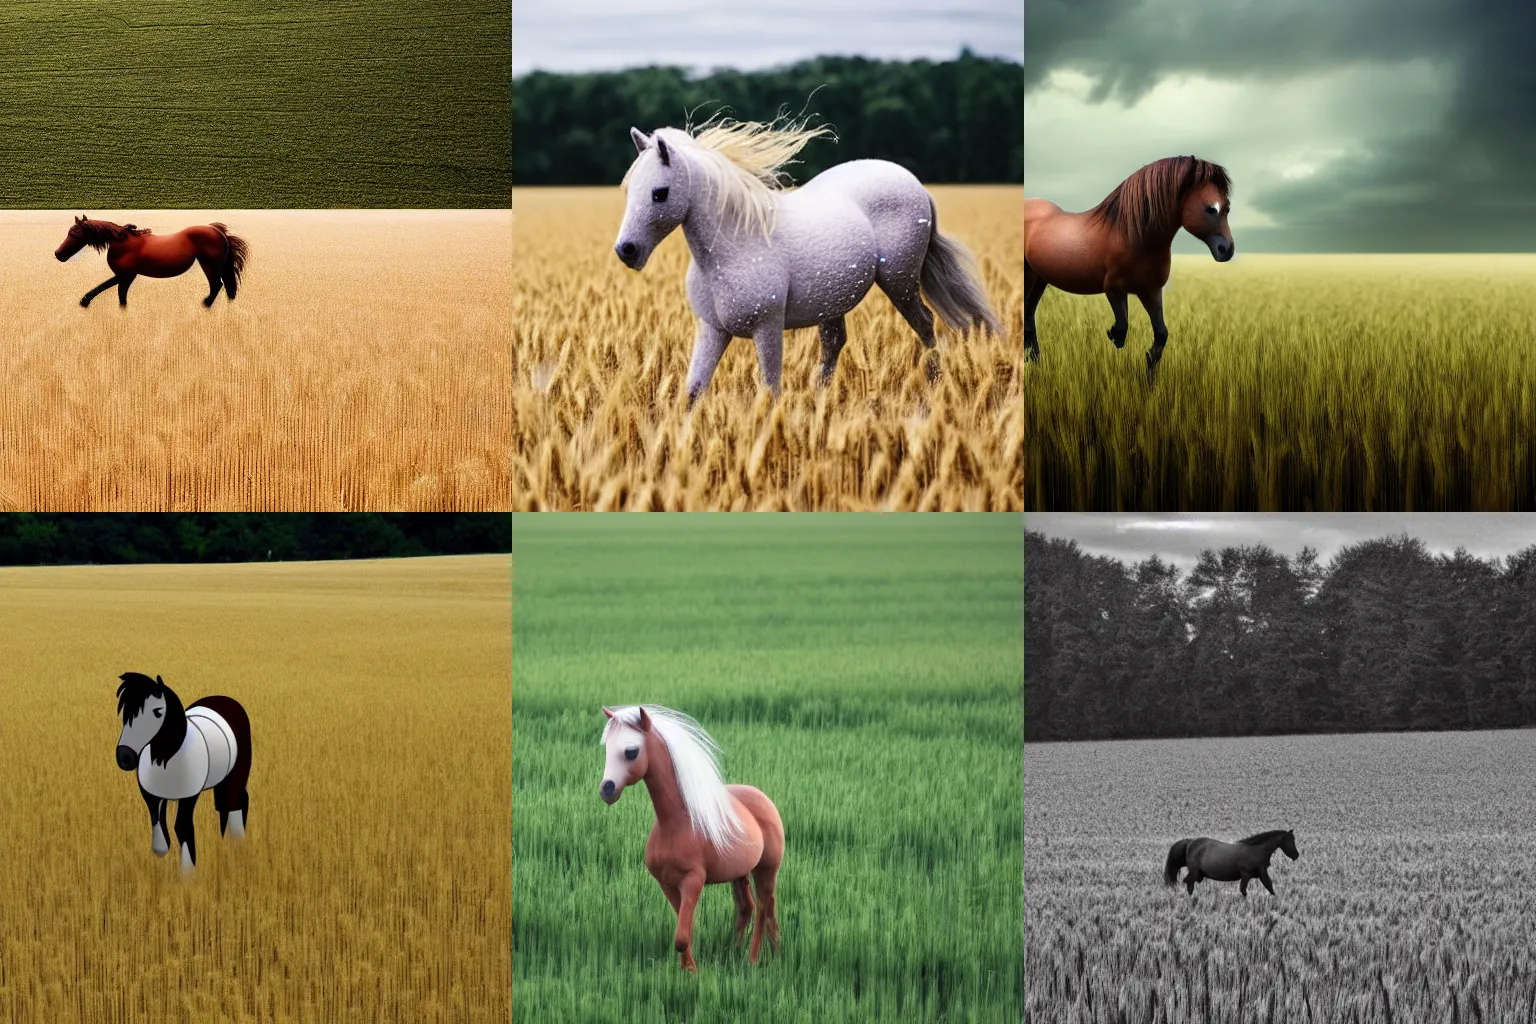 Prompt: A pony is walking through a field of wheat and it is raining